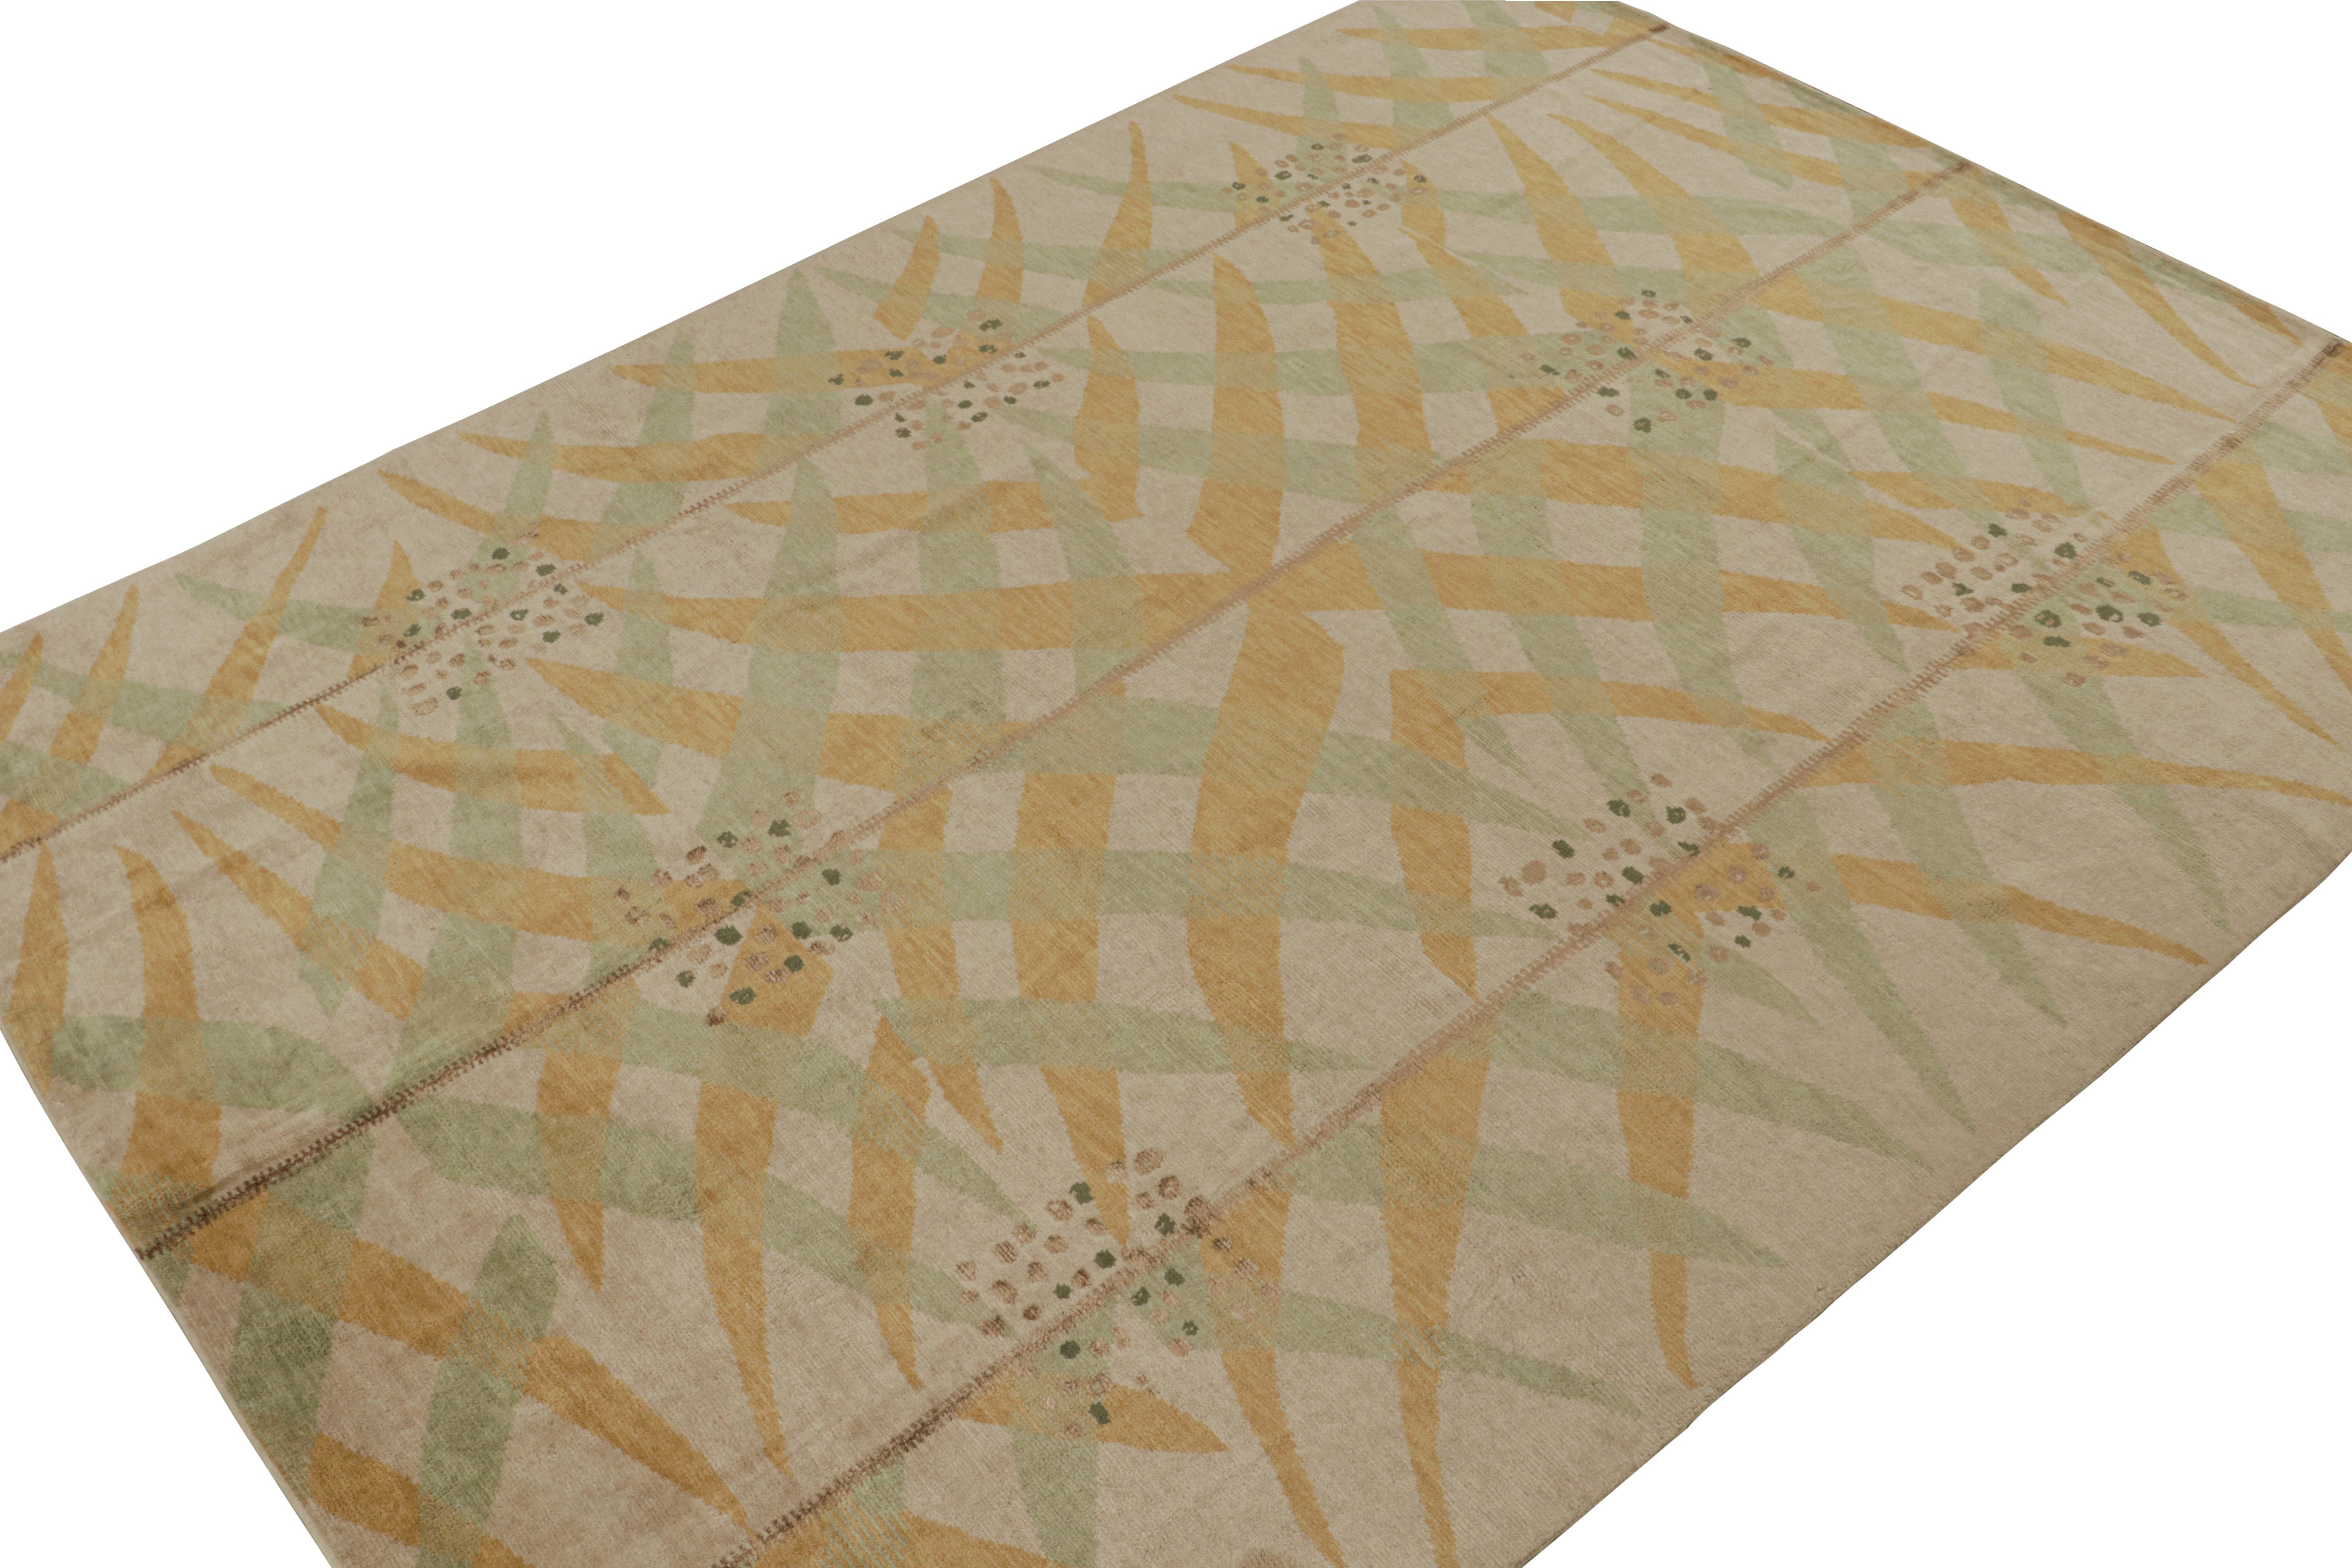 Hand-knotted in wool, this 10x14 rug from the Scandinavian Collection by Rug & Kilim.

On the Design:

This design enjoys beige with gold and green geometric patterns inspired by the Swedish Deco style of Rollakan and Rya rugs. Keen eyes will admire